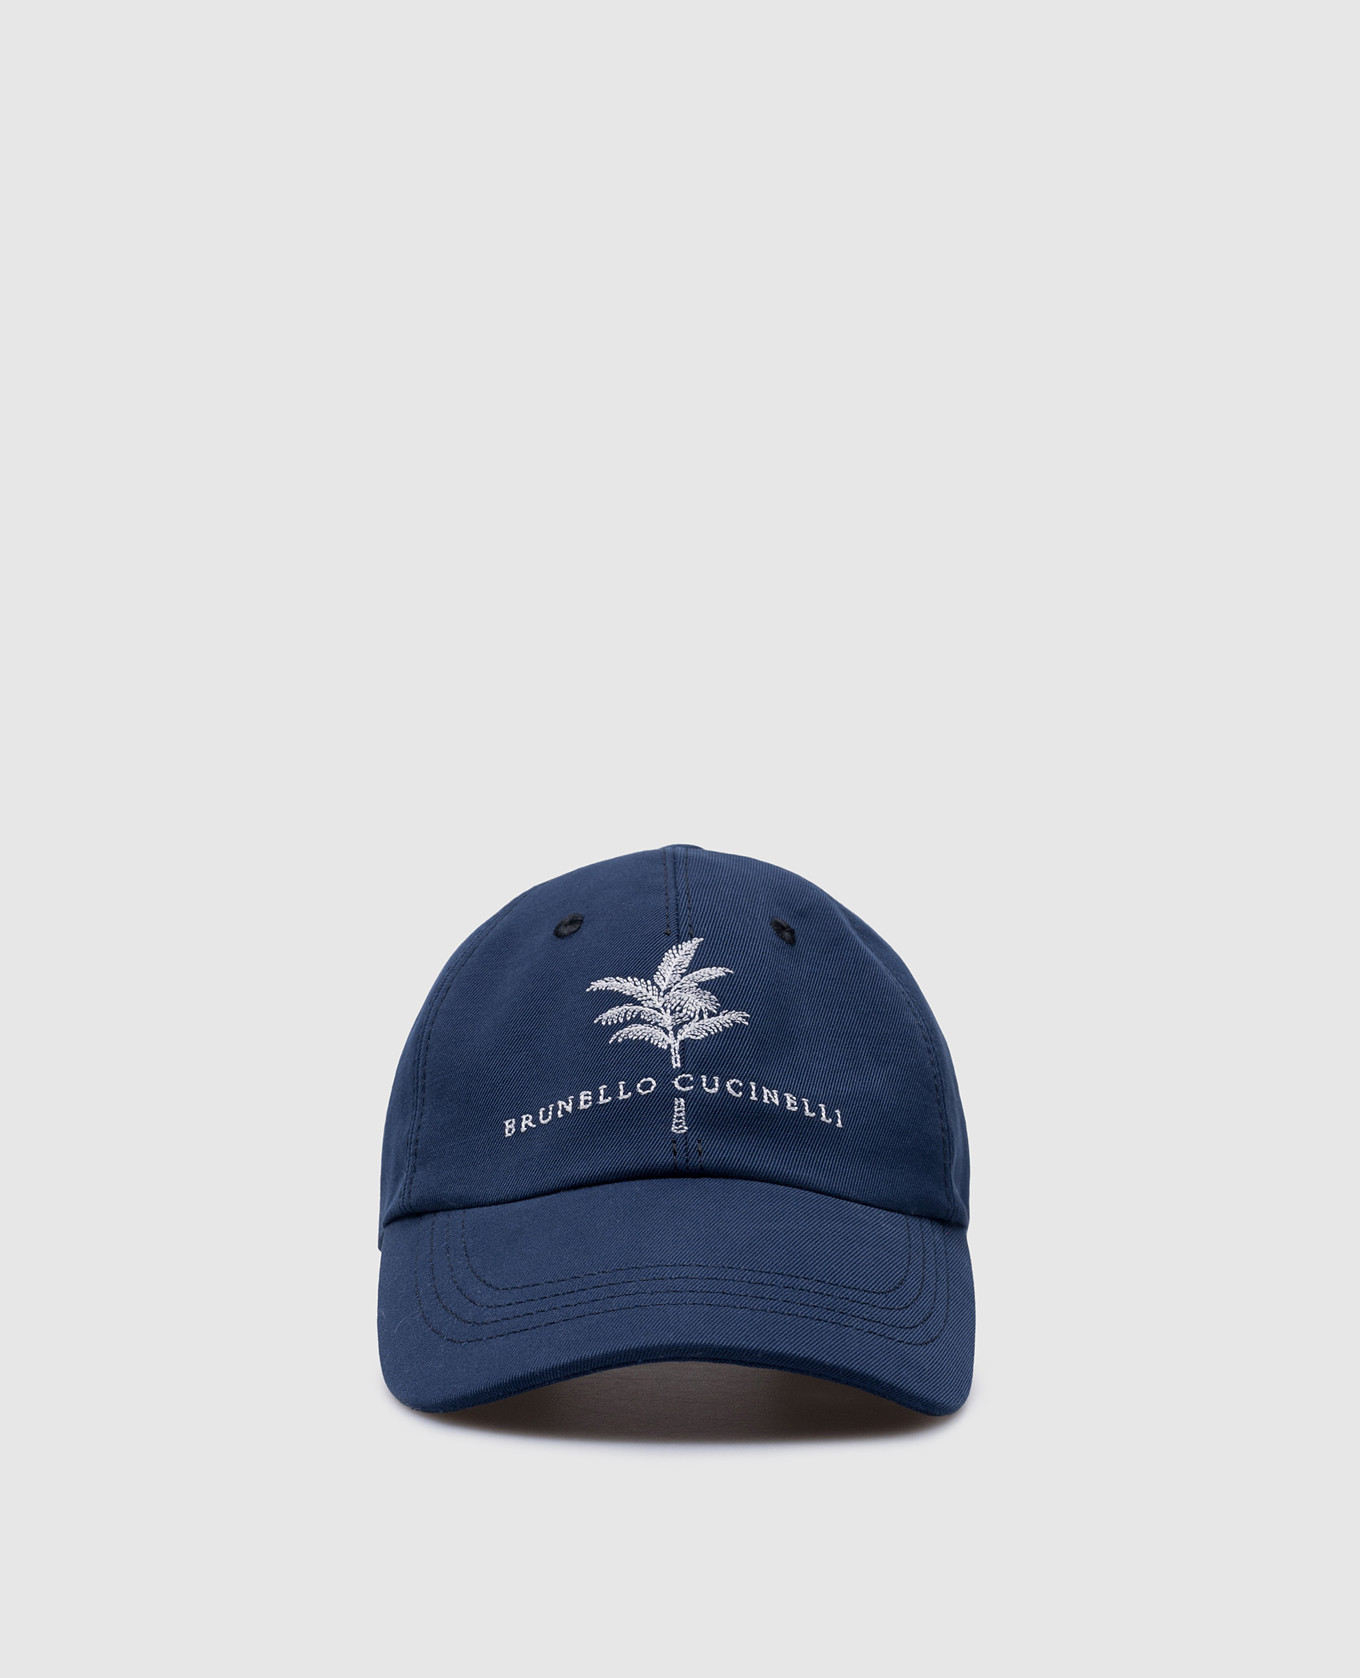 Children's blue cap with embroidery